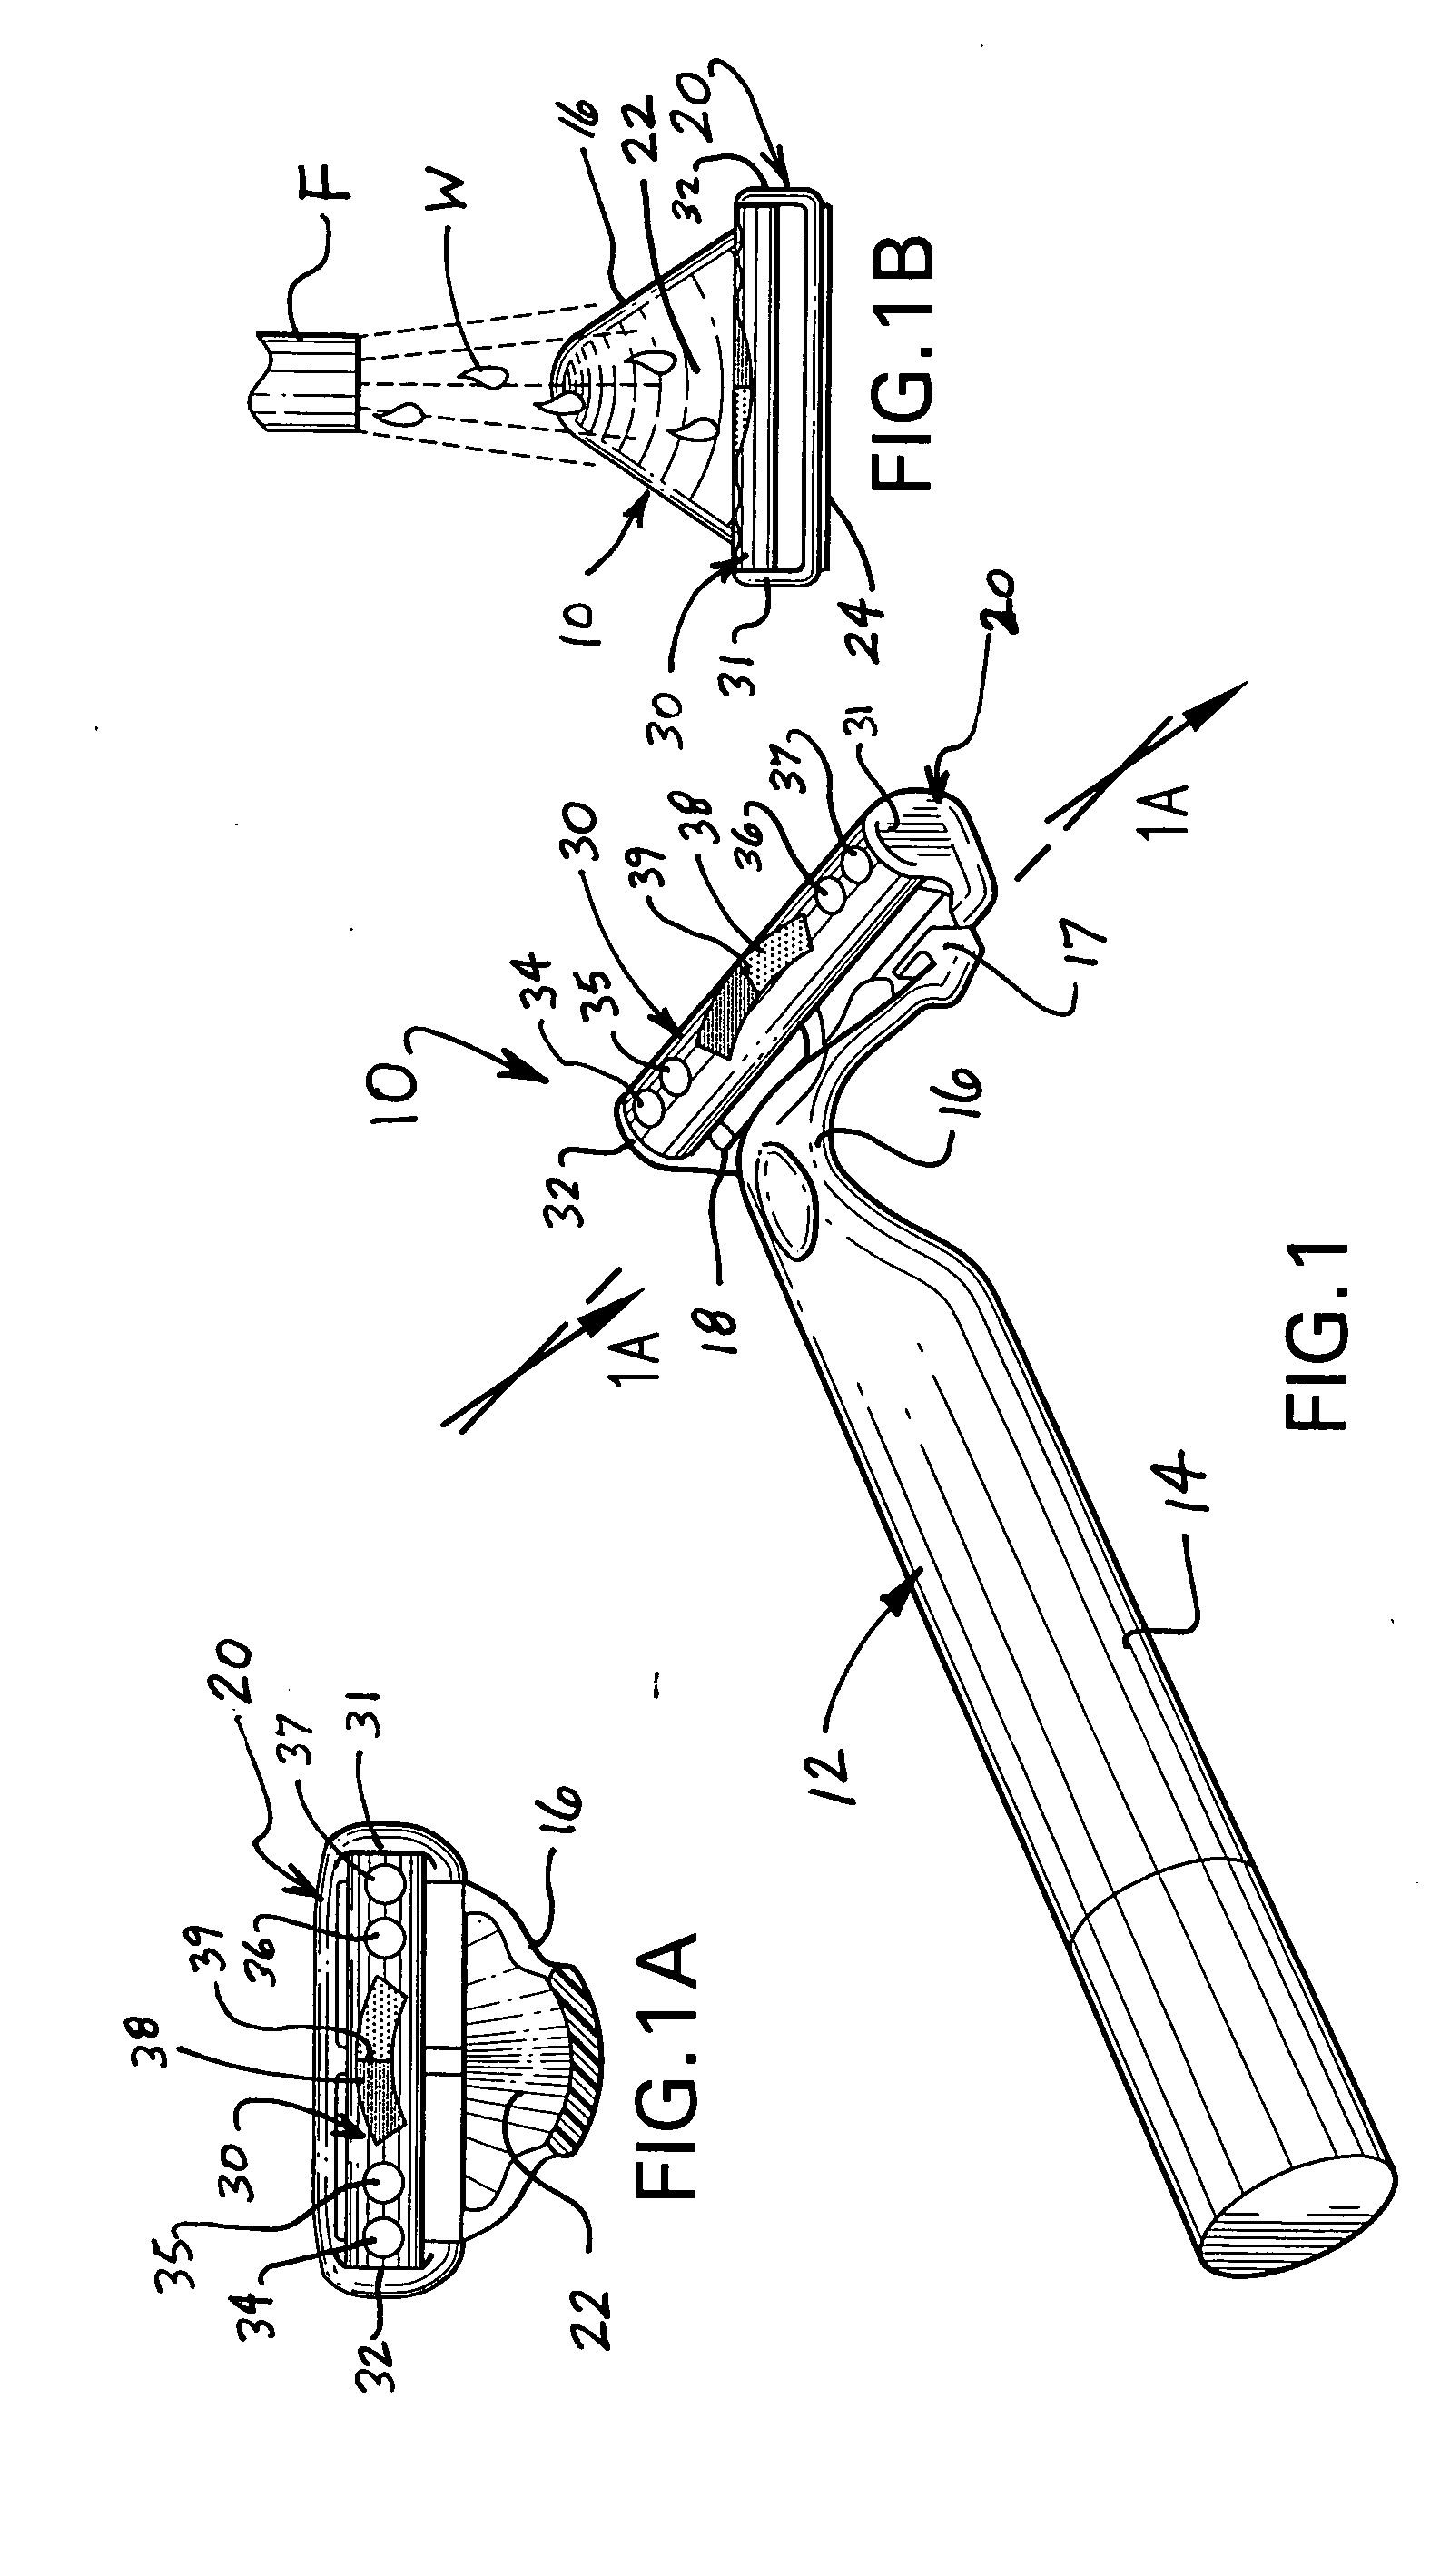 Razor with blade heating system